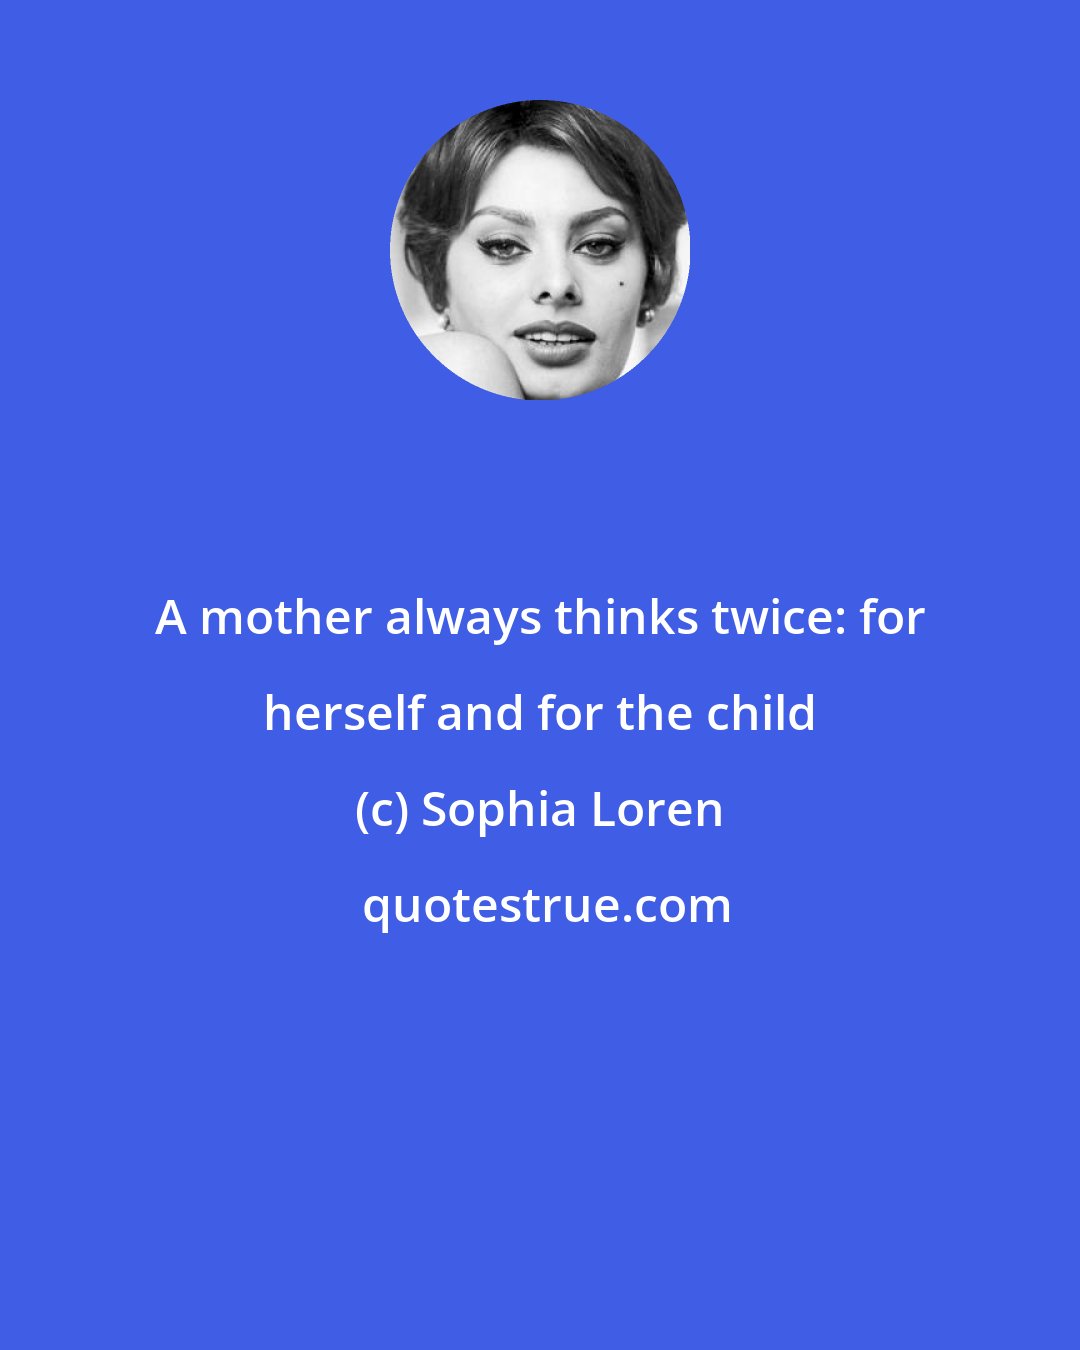 Sophia Loren: A mother always thinks twice: for herself and for the child